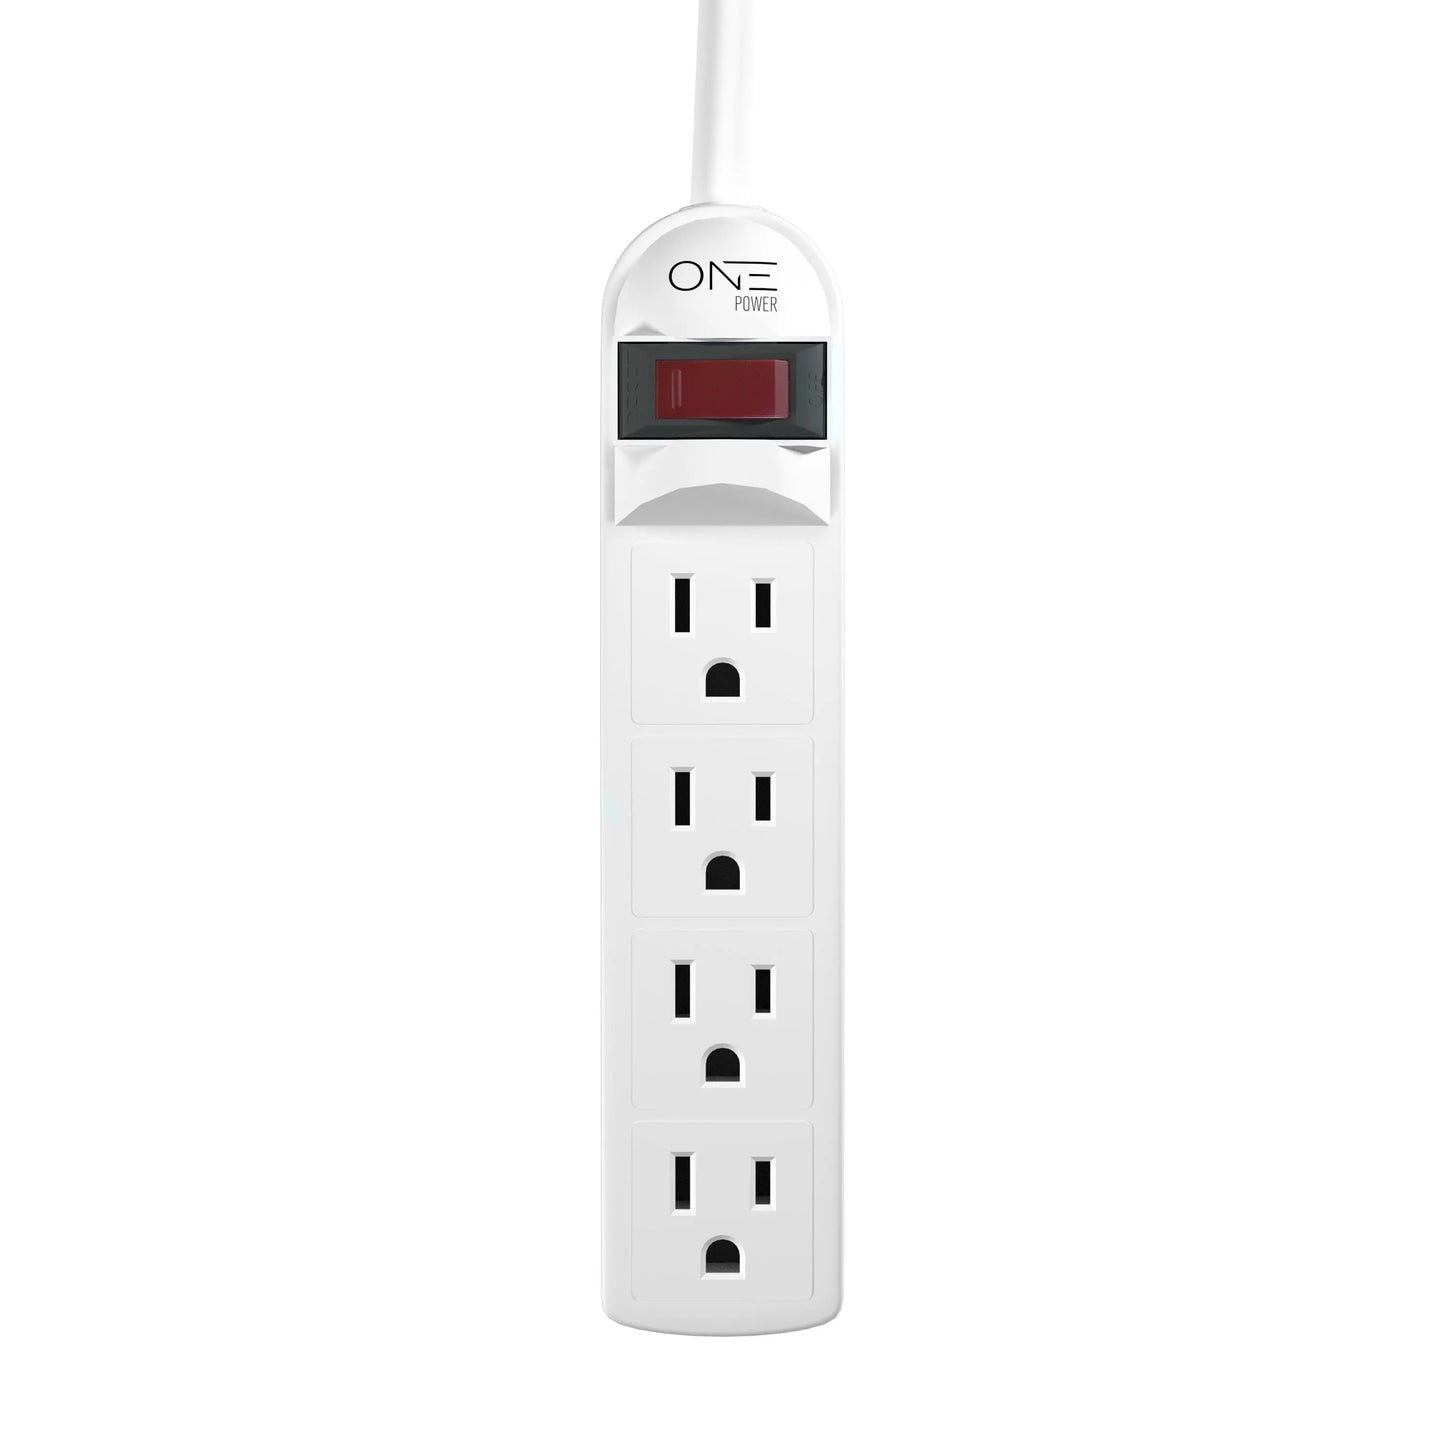 ONE Power 4 Outlet Power Strip with 2 Foot Extension Cord (PS401)